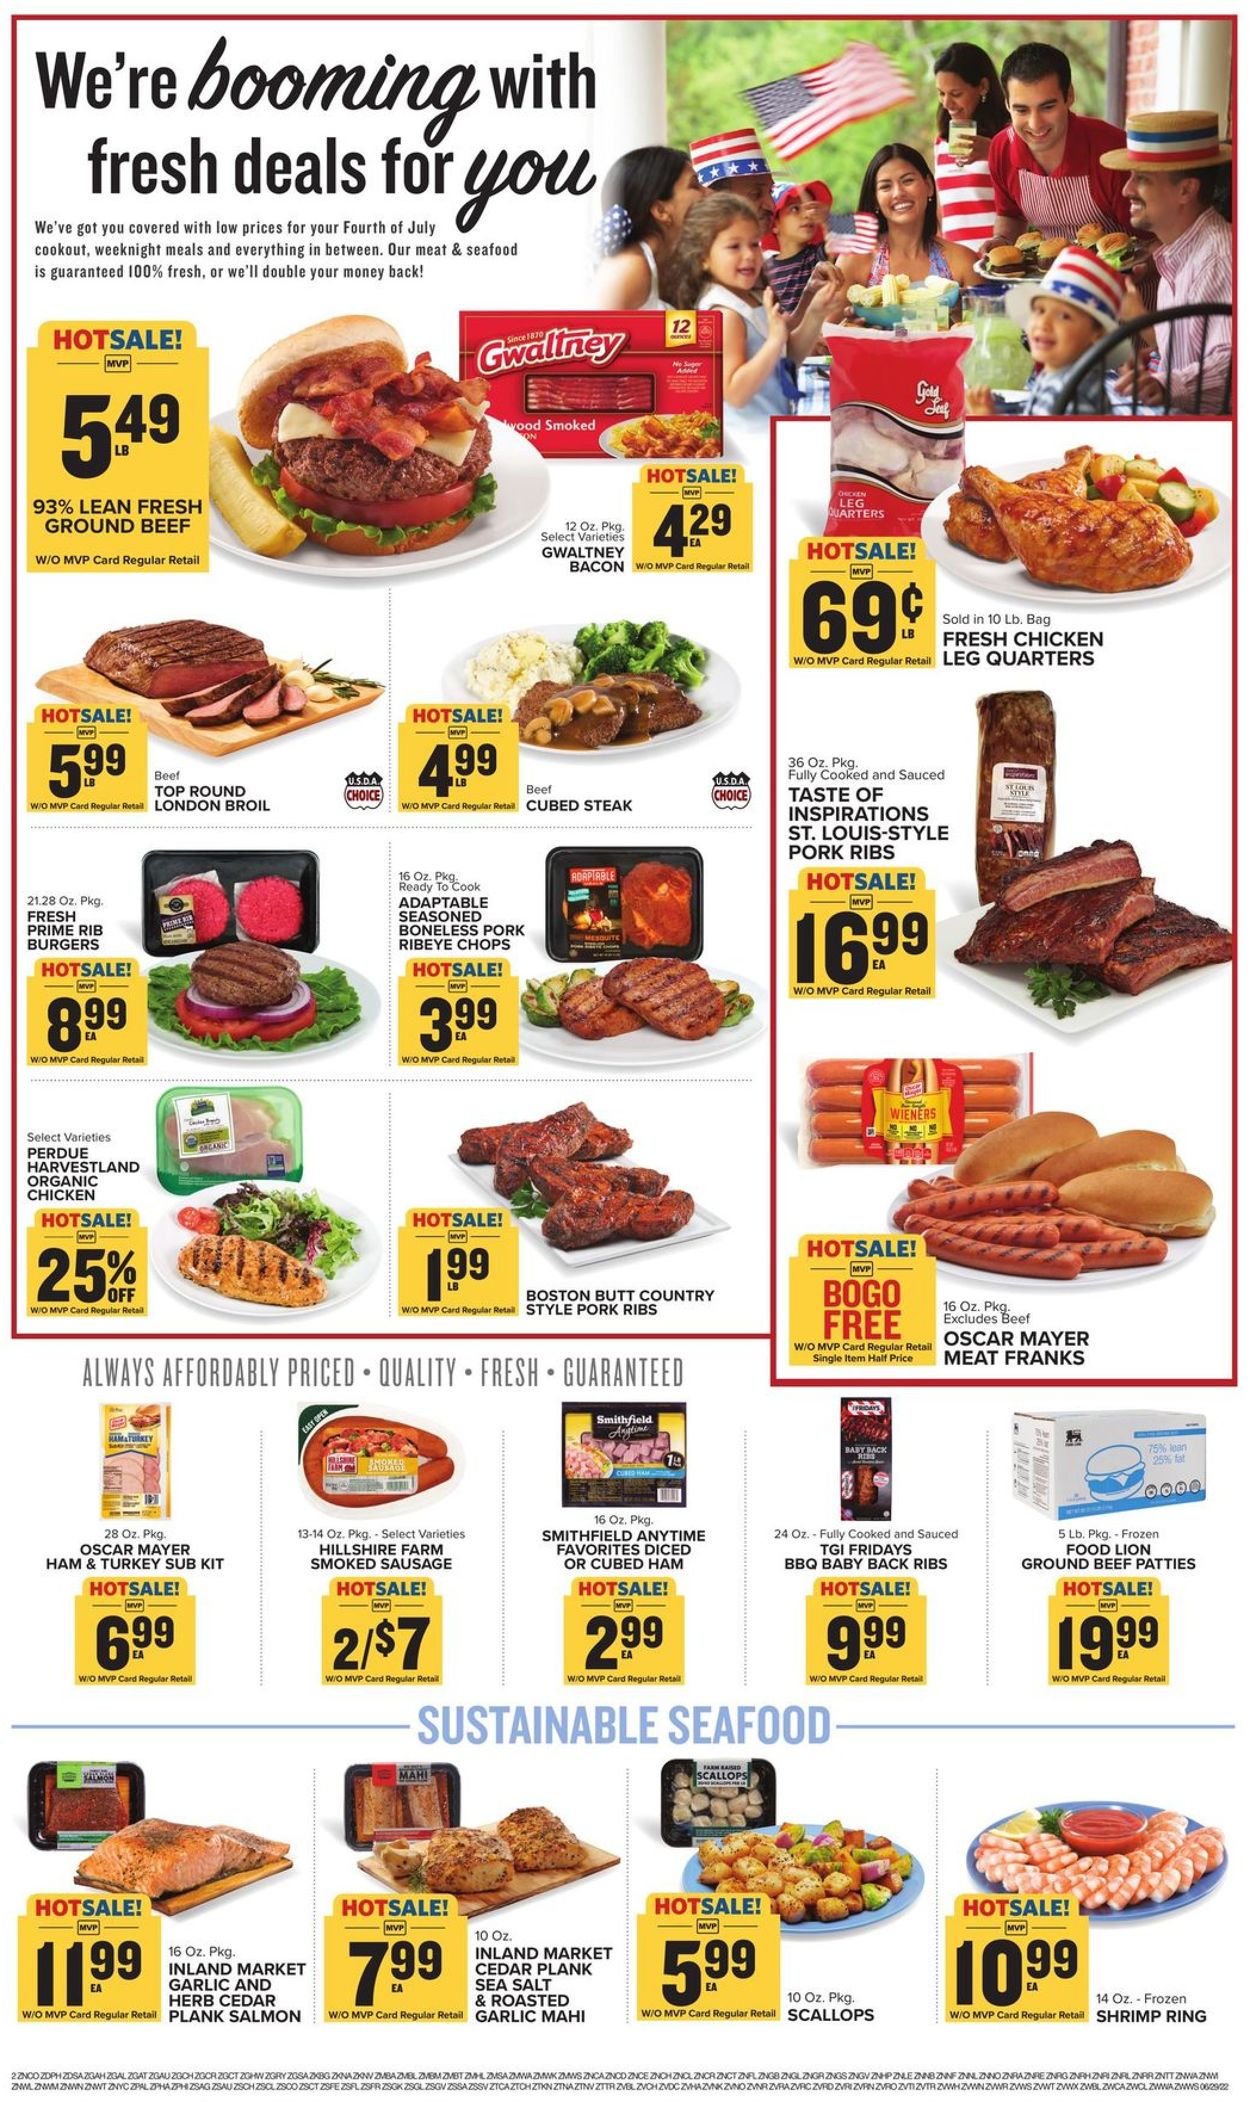 Food Lion 4th of July Sale Current weekly ad 06/29 07/05/2022 [3